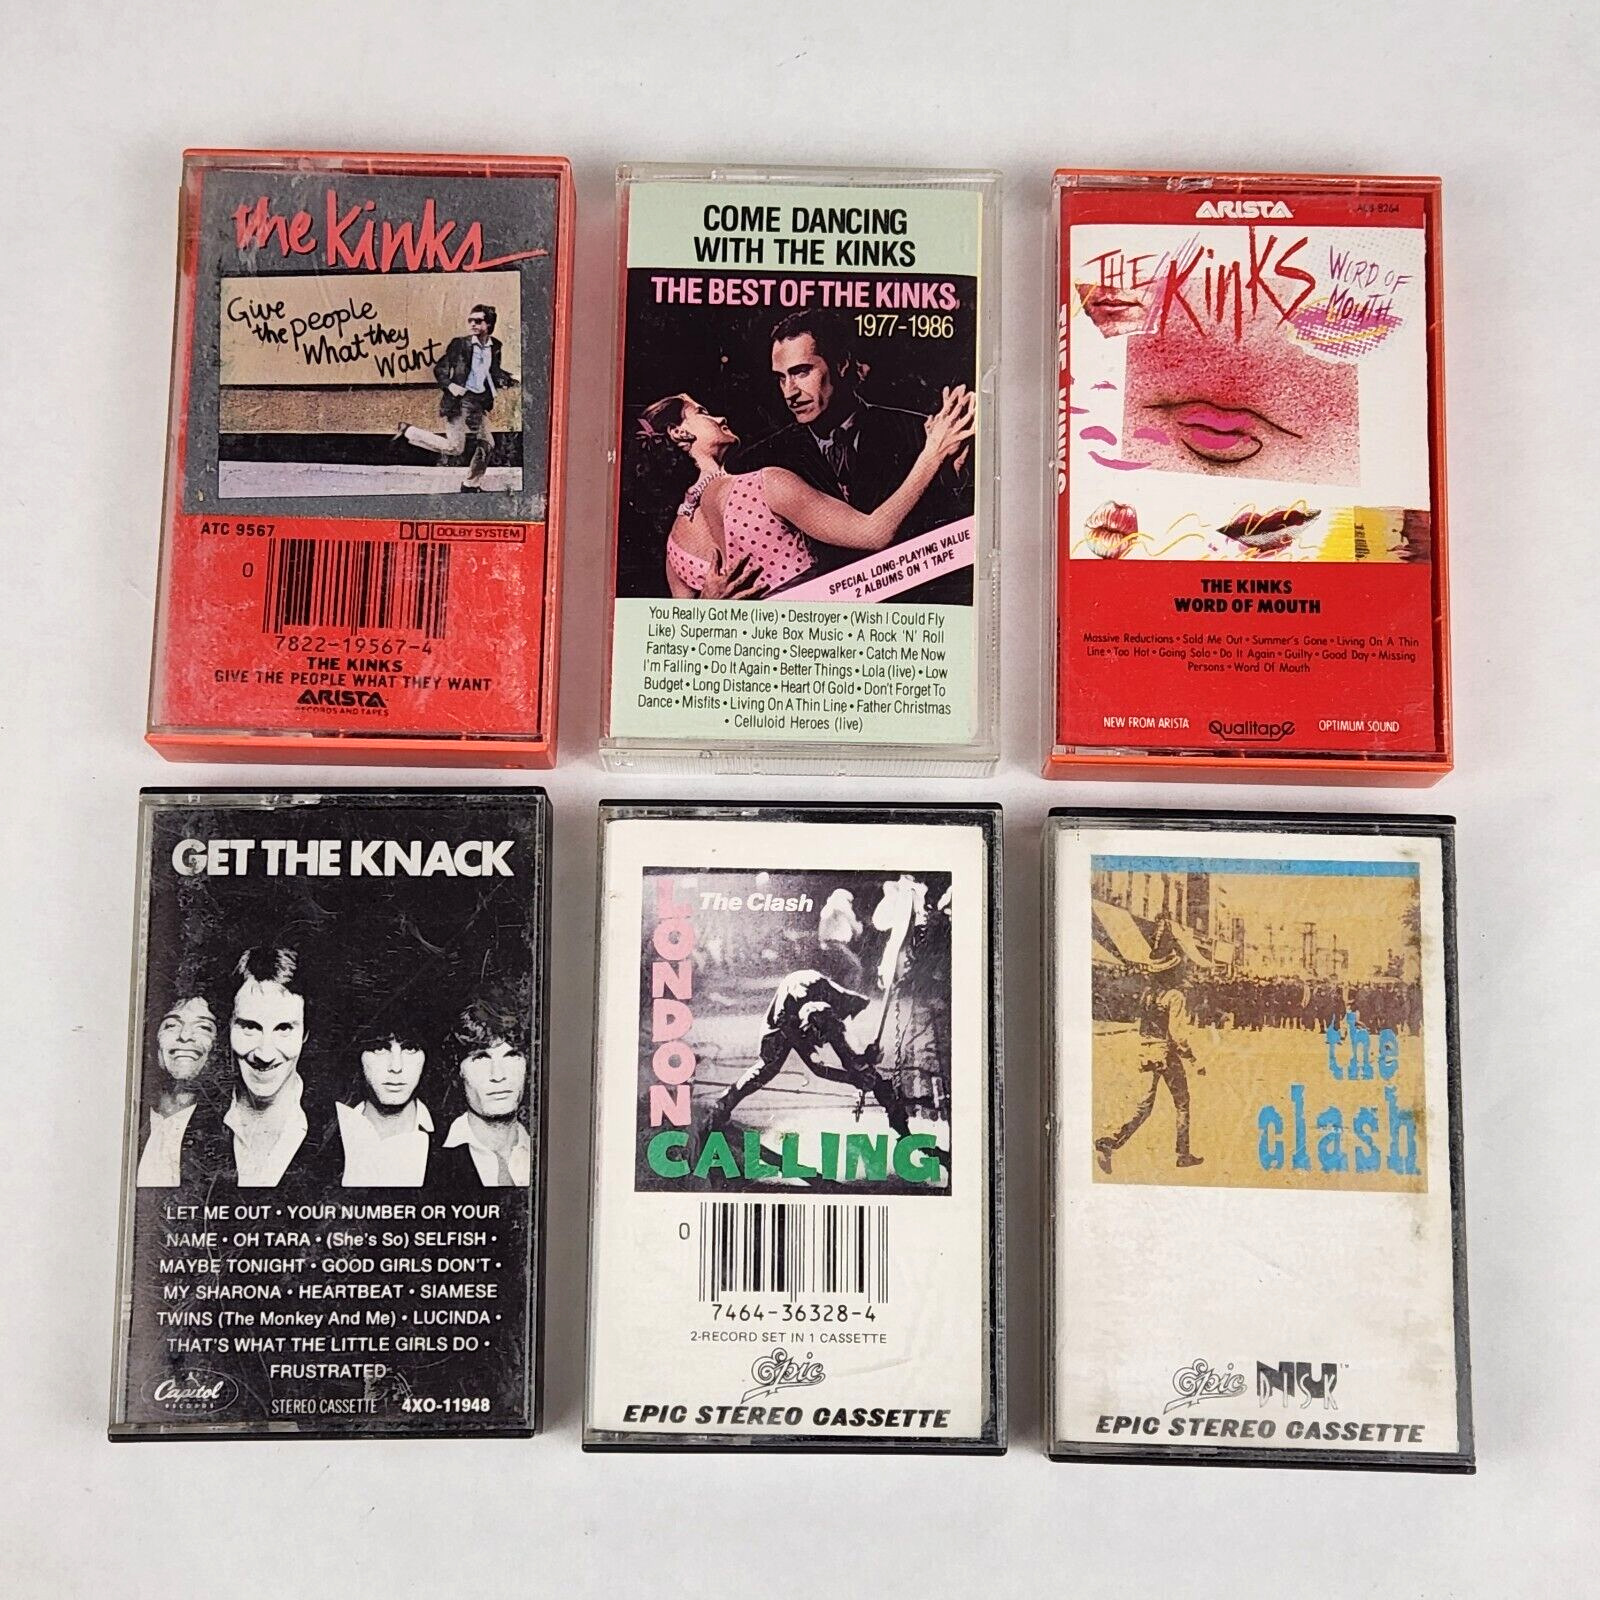 The Clash The Kinks The Knack Cassette Tape Lot of 6 London Calling Word of ...